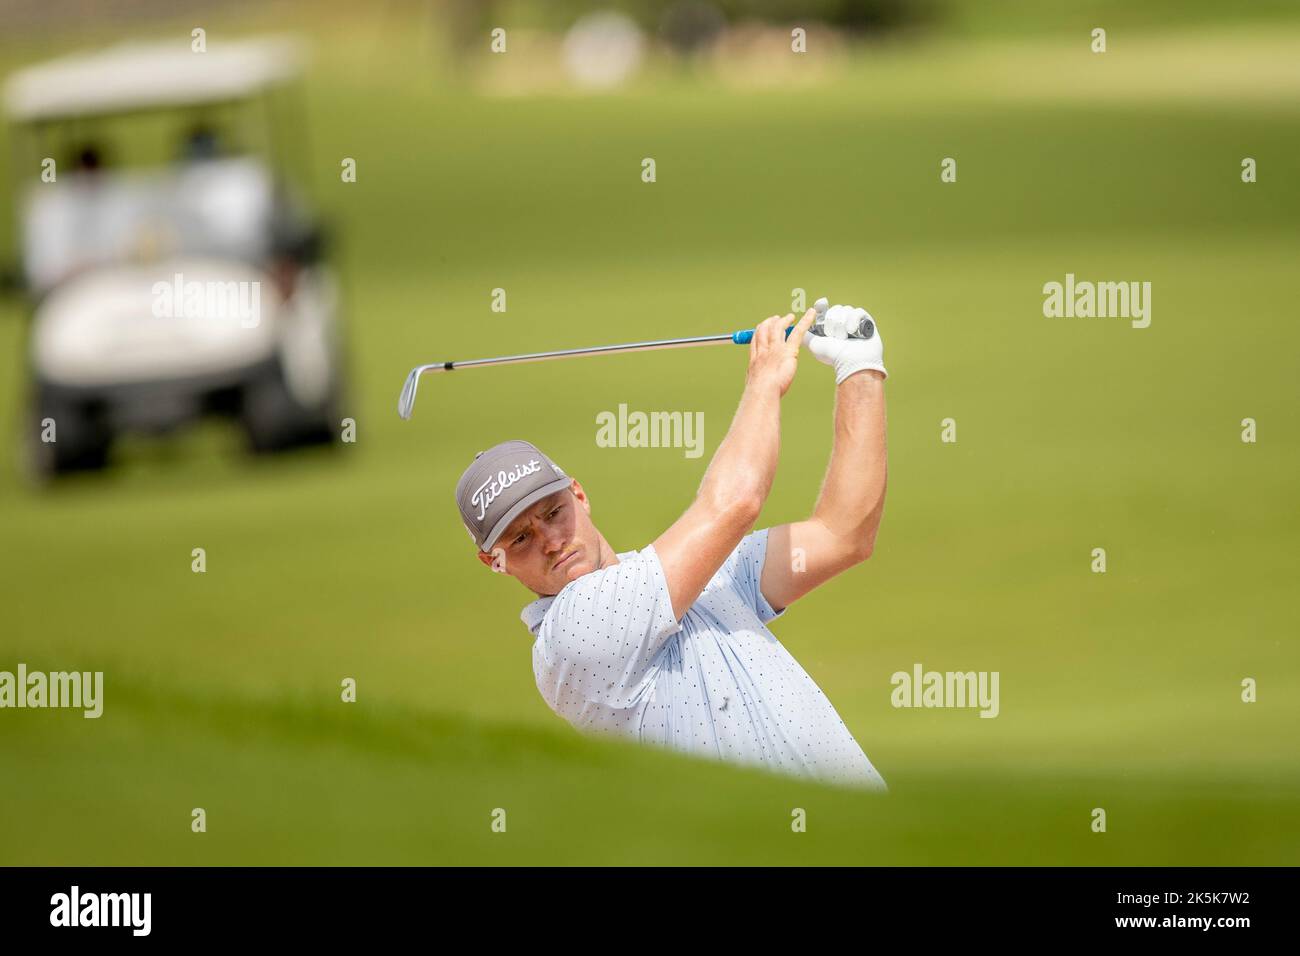 BANGKOK, THAILAND - OCTOBER 9:  Jediah Morgan of Australia on hole 9 during the third and final round at the LIV GOLF INVITATIONAL BANGKOK at Stonehill Golf Course on October 9, 2022 in Bangkok, THAILAND (Photo by Peter van der Klooster/Alamy Live News) Stock Photo